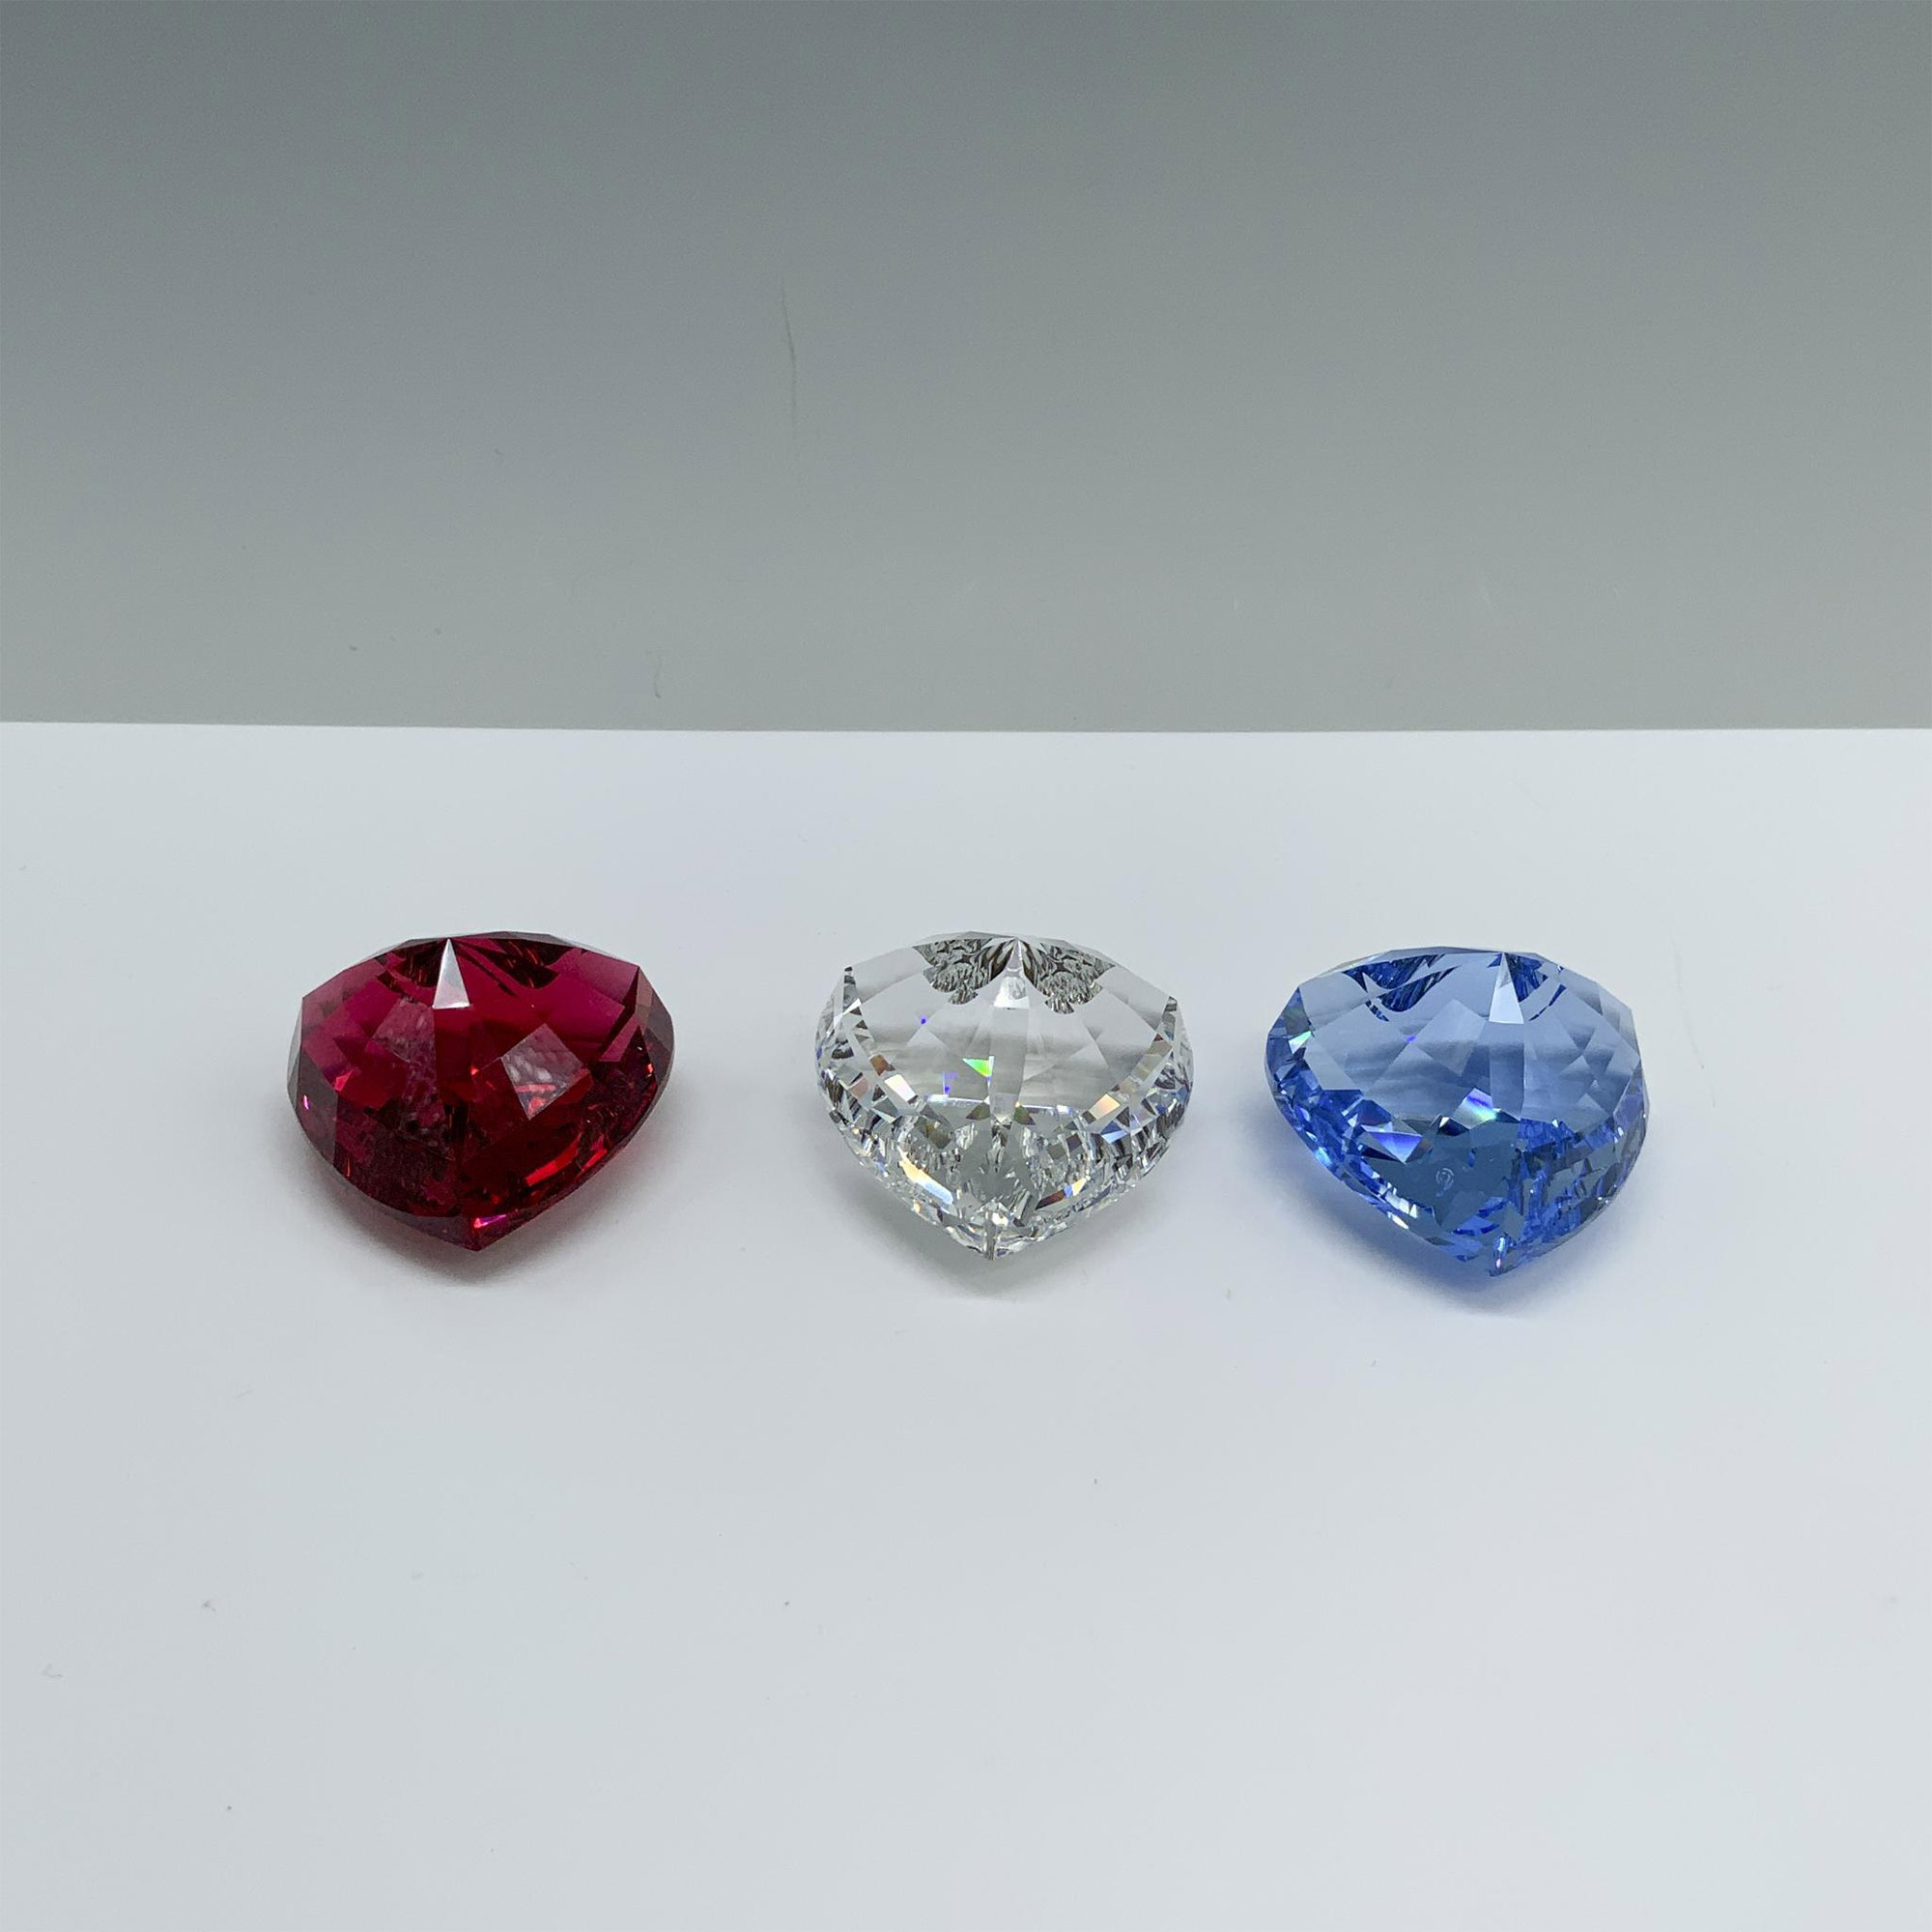 3pc Swarovski Crystal Figurines, Red, Blue, and Clear Heart - Image 3 of 4